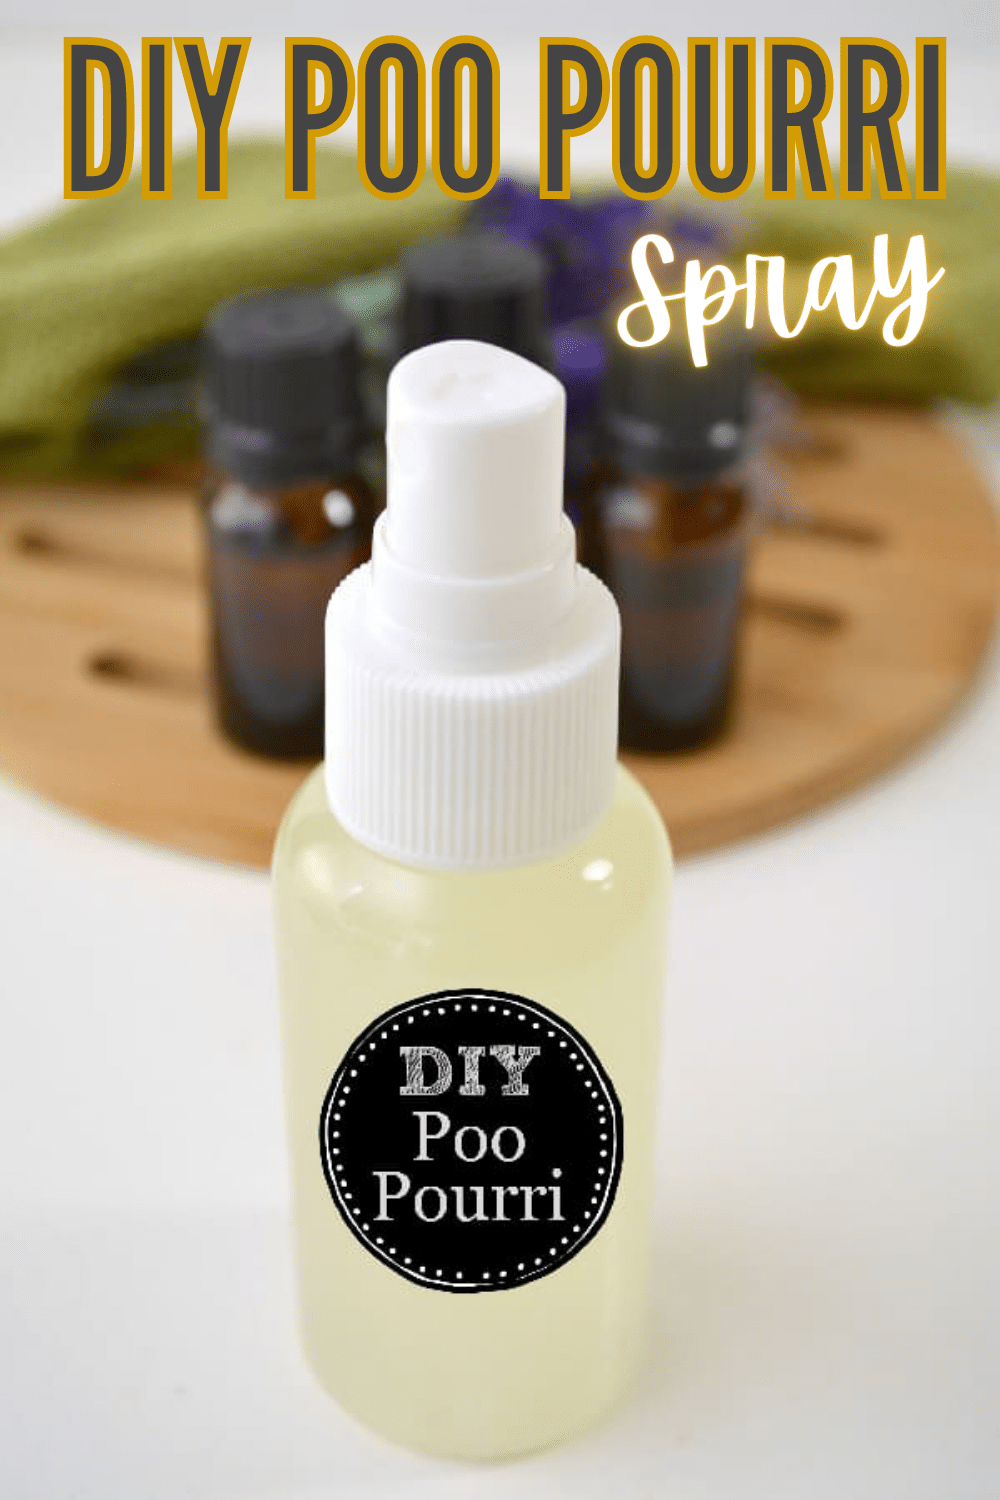 This recipe for DIY Poo Pourri Spray is so easy and inexpensive. Now I'll never run out and can keep a bottle in every bathroom! #essentialoils #bathroom via @wondermomwannab